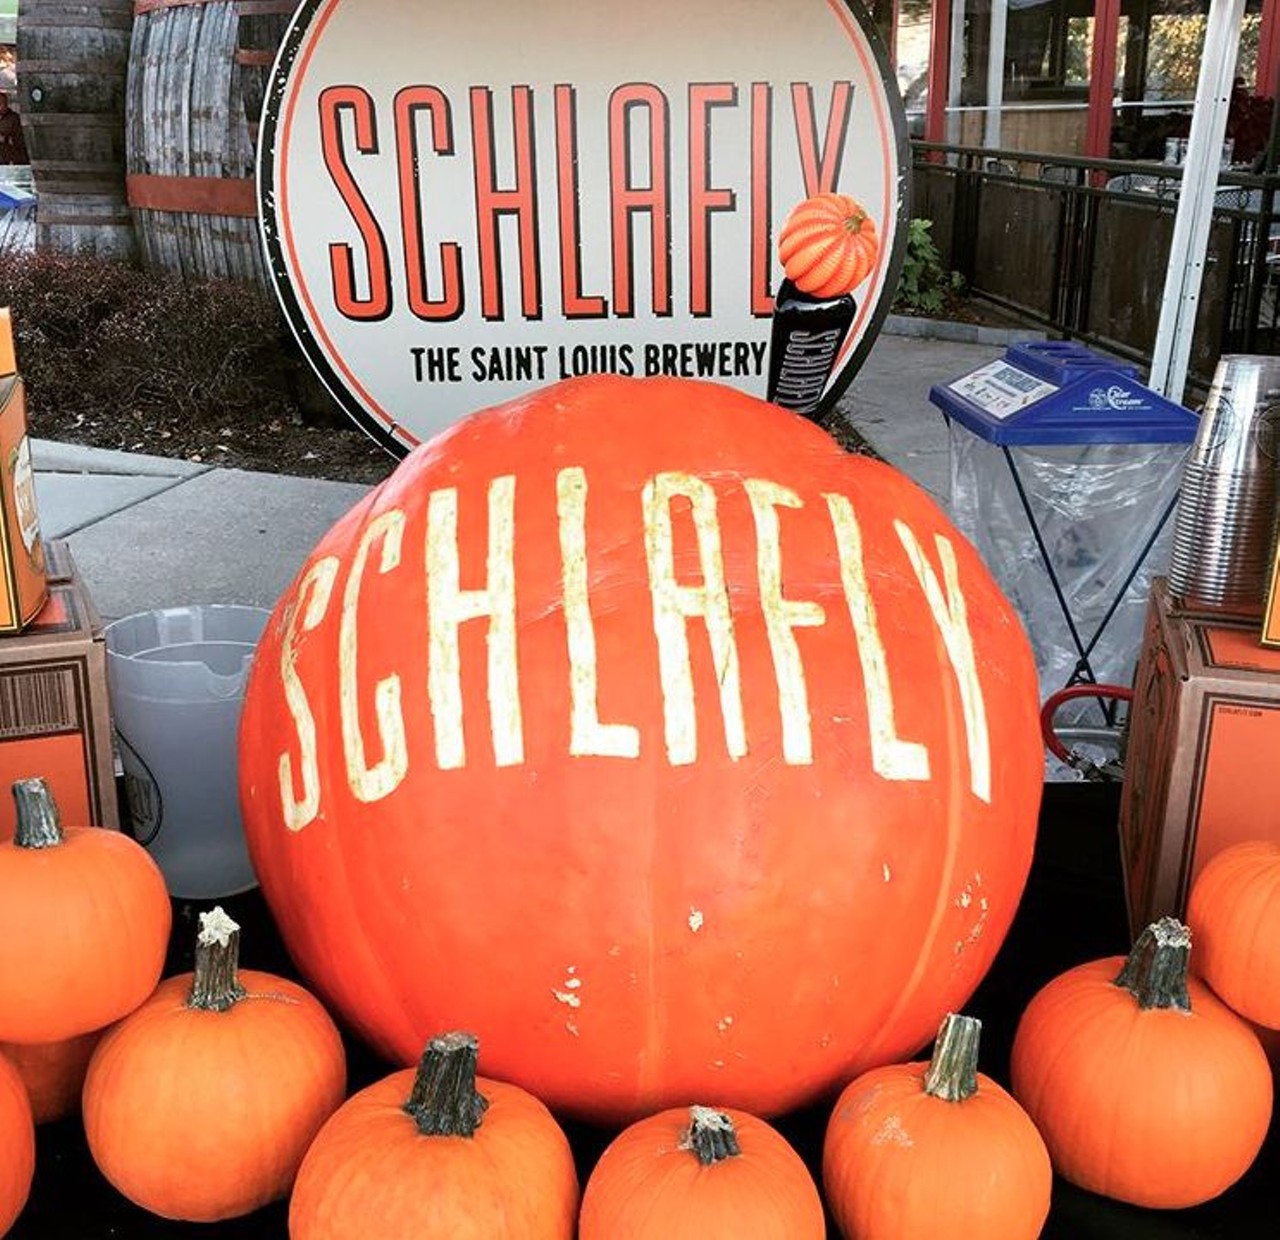 Schlafly Full Moon Festival
Schlafly Bottleworks
7260 Southwest Ave.
St. Louis, MO 63143
Live music, six bonfires, a pig roast and fall-themed activities are on the agenda for the Schlafly Full Moon Festival at Schlafly Bottleworks on November 4. And, of course, there will be plenty of beer, including seasonal flavors like Pumpkin Ale, White Lager, Pilsner, Coffee Stout, Hard Apple Cider and more. Get more details here. Photo courtesy of Instagram / schlaflybeer.